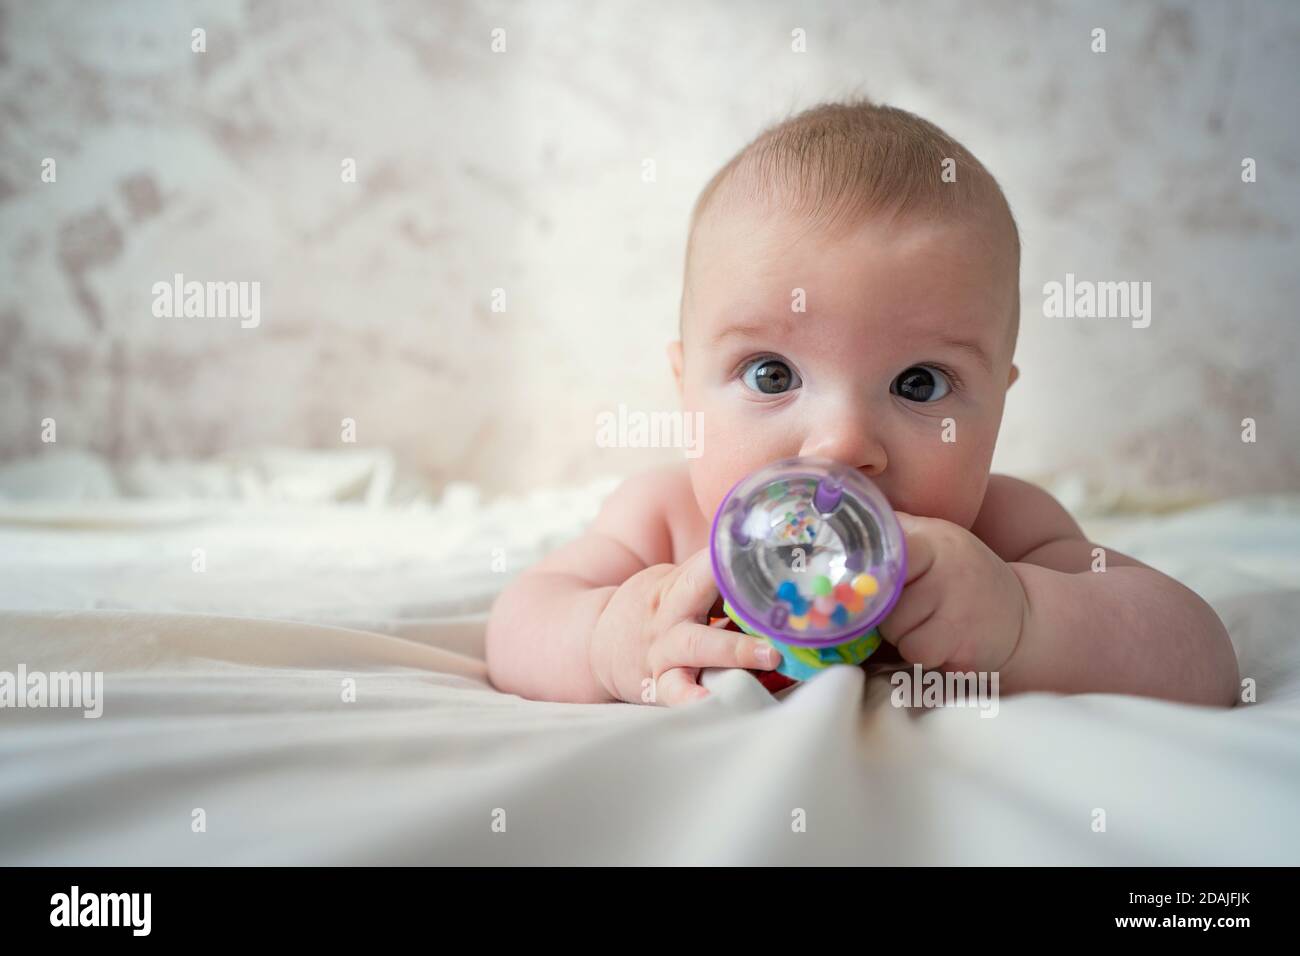 Cute happy baby thumb-sucking and plays a rattle Stock Photo